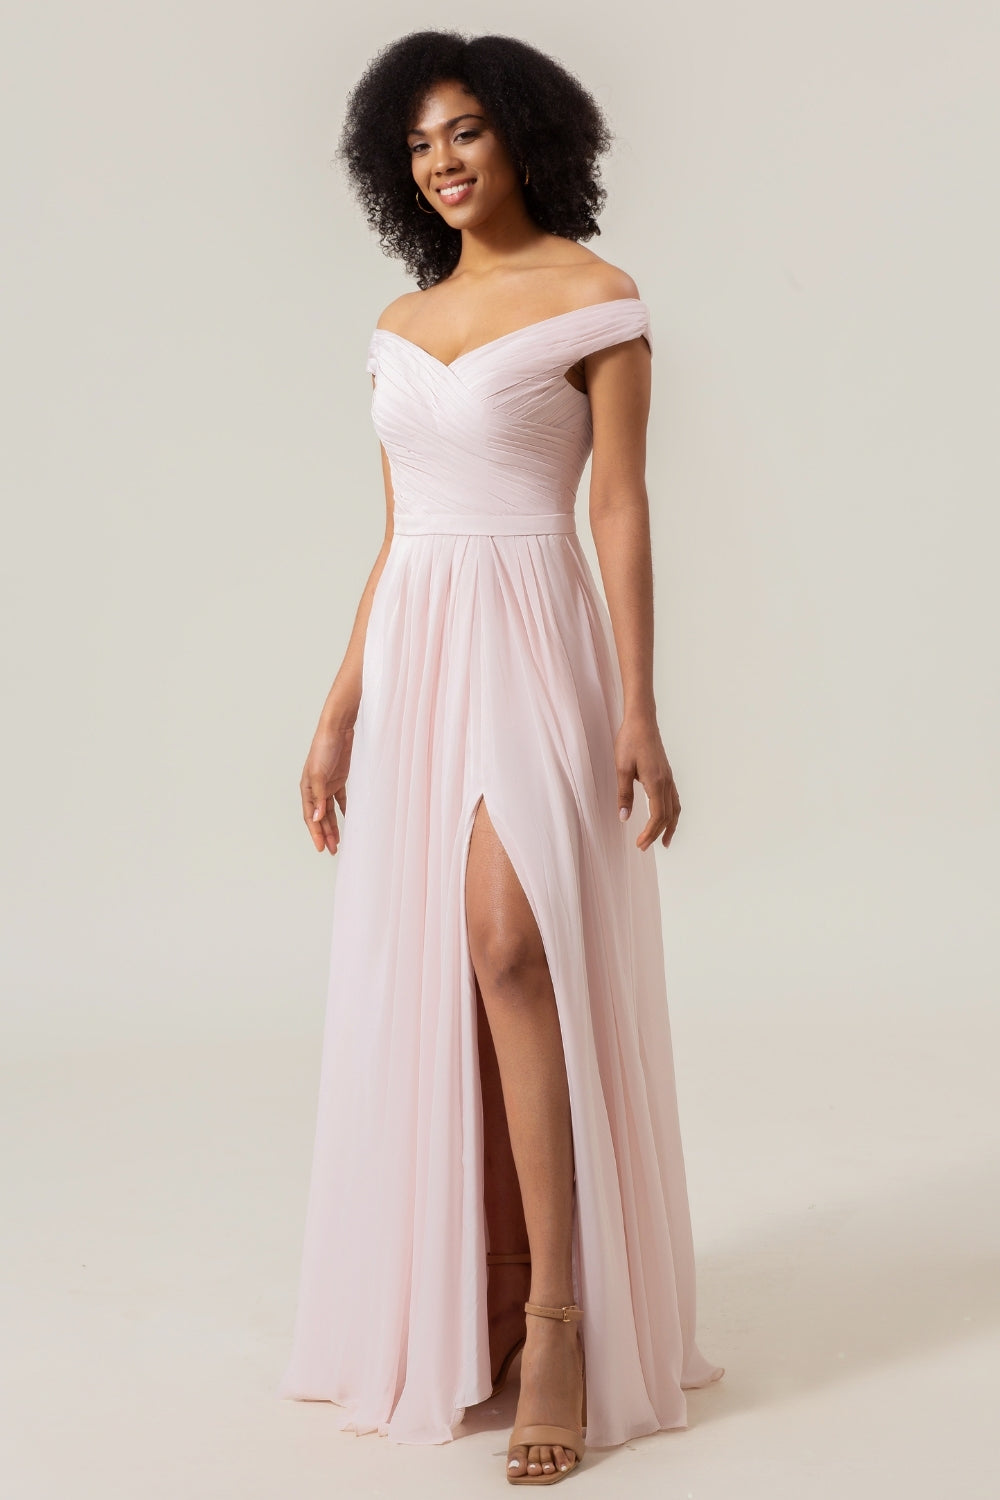 Blush Pink A-Line Off the Shoulder Chiffon Pleated Bridesmaid Dress with Slit